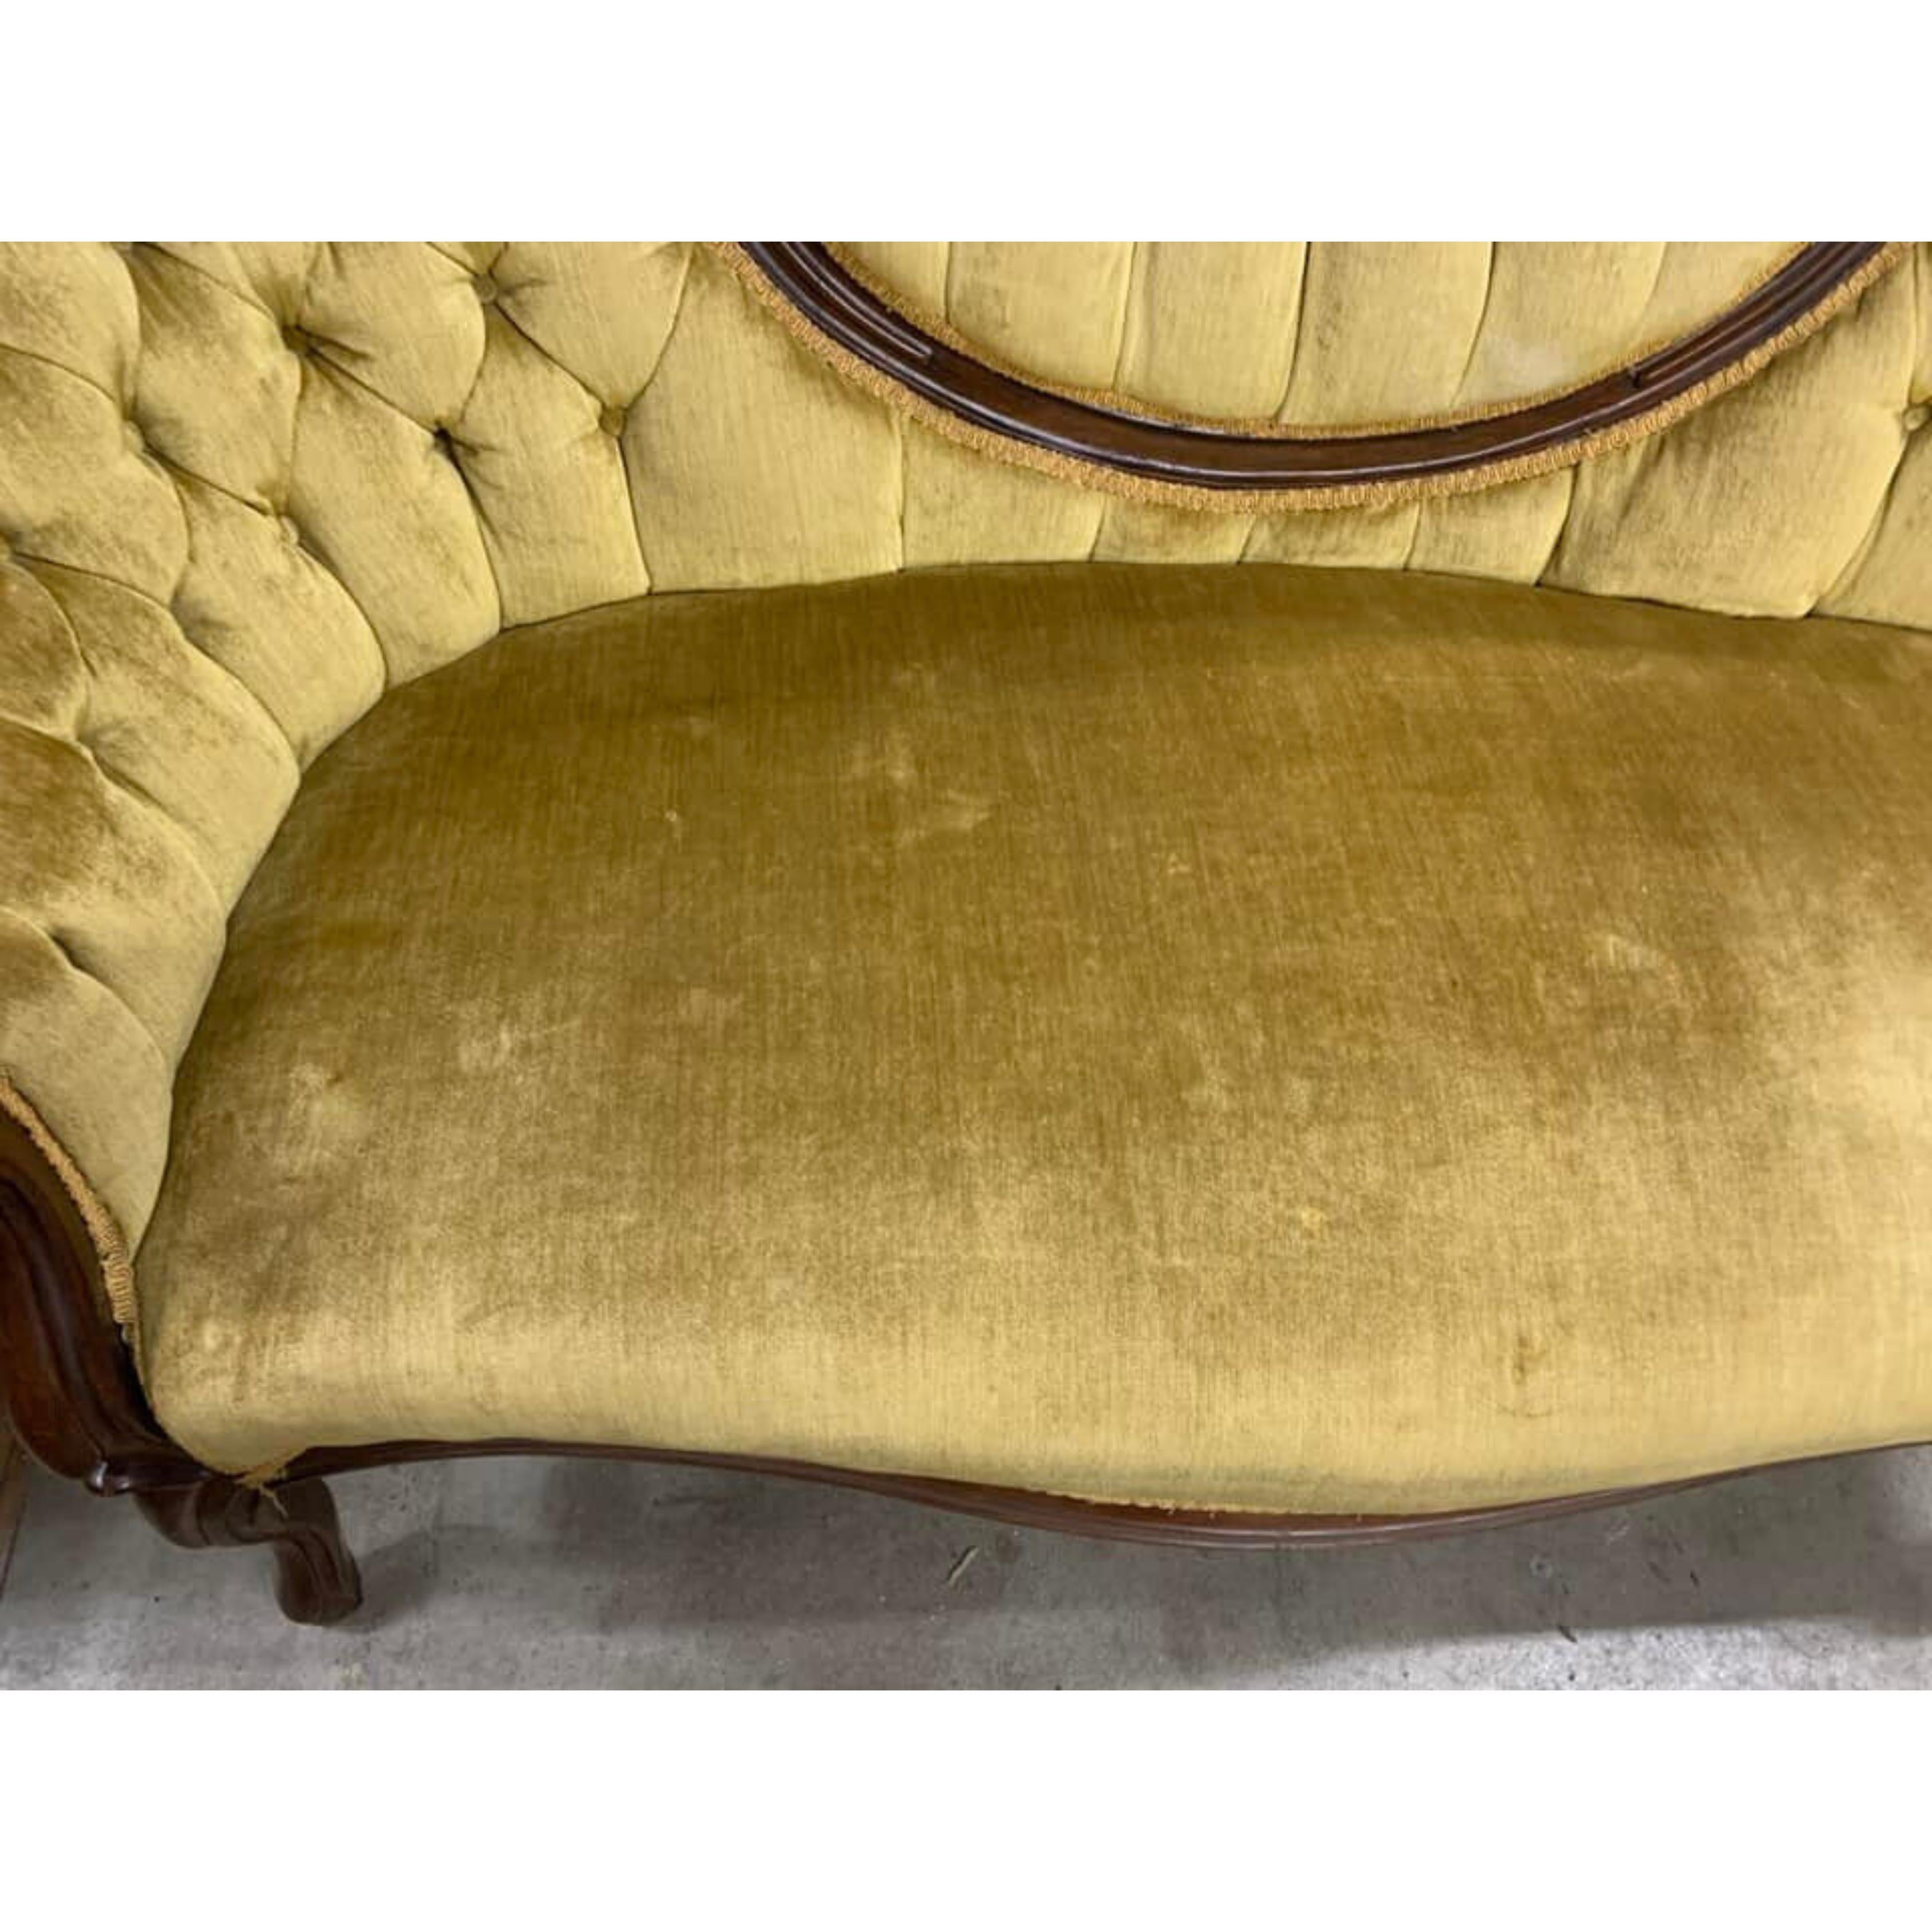 Other 1900's Antique Gold, Velvet, Tufted, Mahogany, Cameo Style Back Settee!!